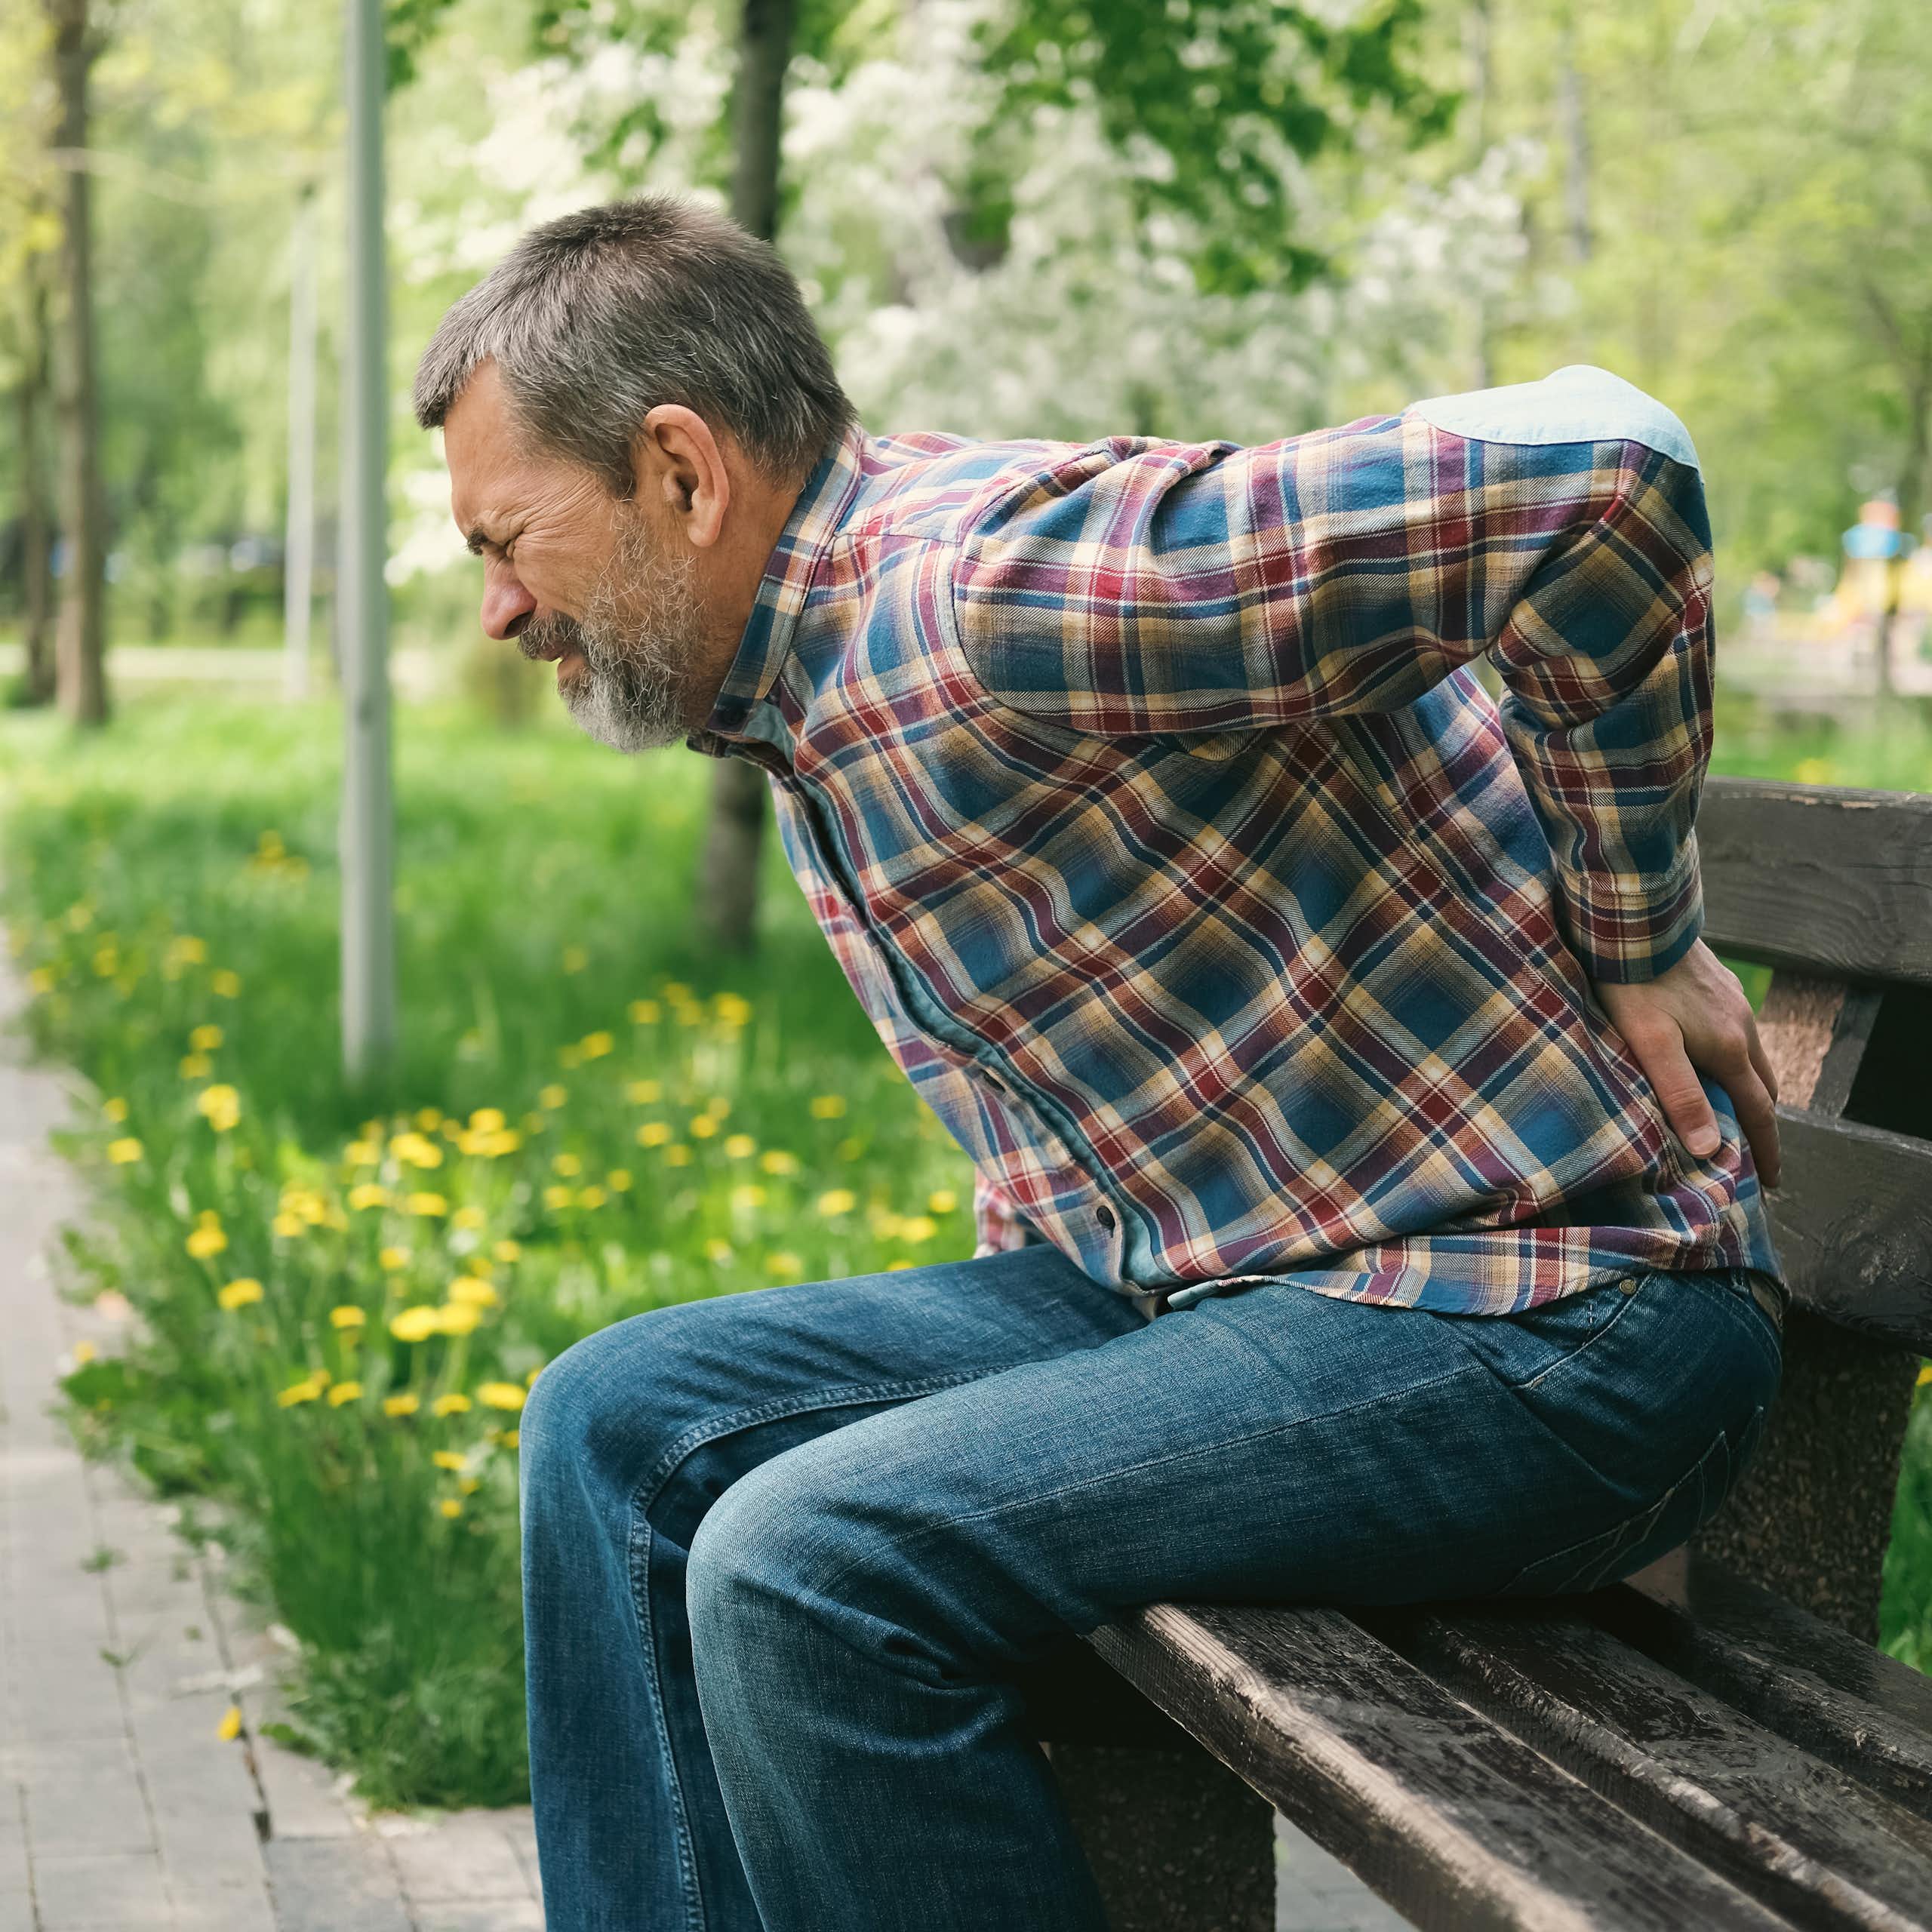 As he grimaces in pain, a man sitting on a park bench braces his back with his left hand.